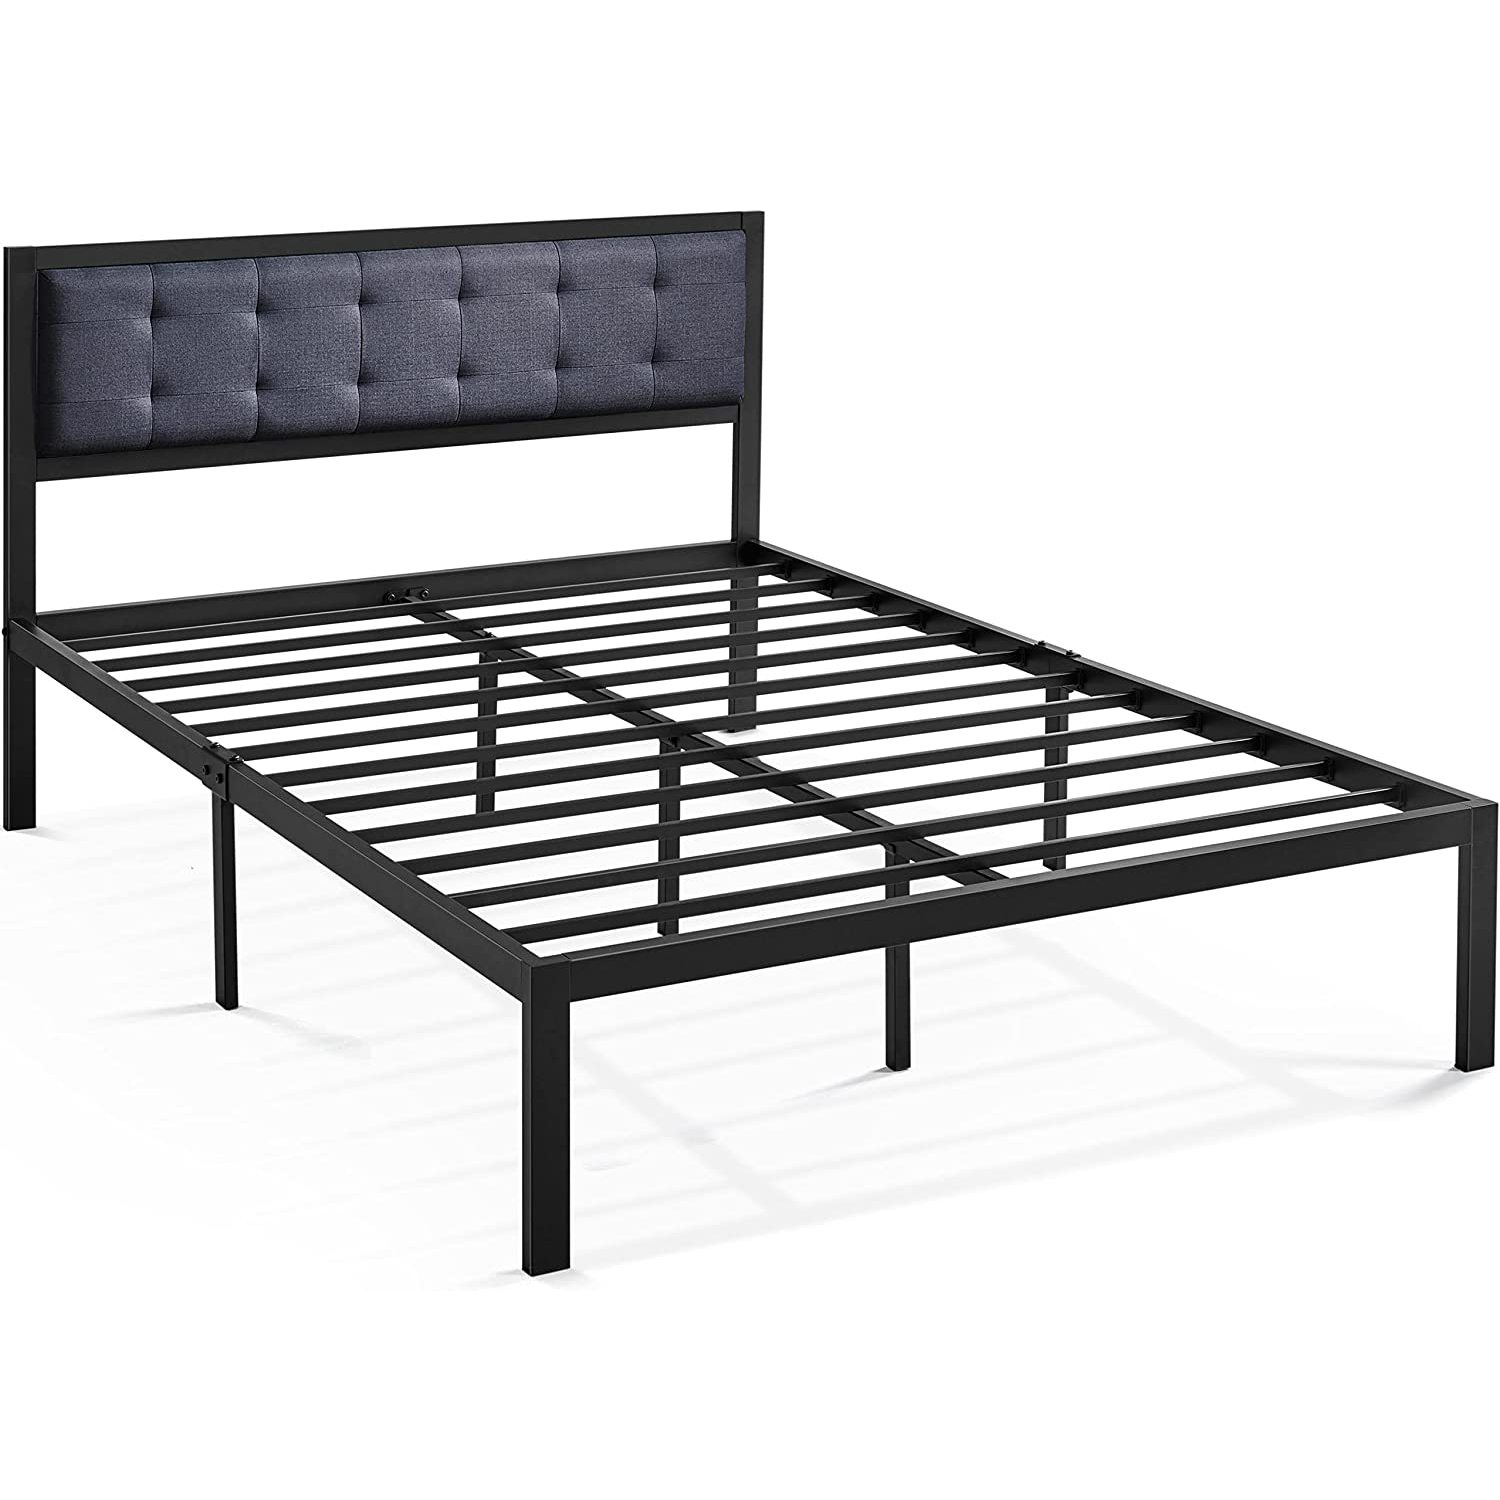 Queen Size Linen Upholstered Platform Metal Bed Frame with Button Tufted Headboard,Gray, UPHOLSTERED HEADBOARD: This bed frame features beautiful upholstery and cushione... - image 1 of 7